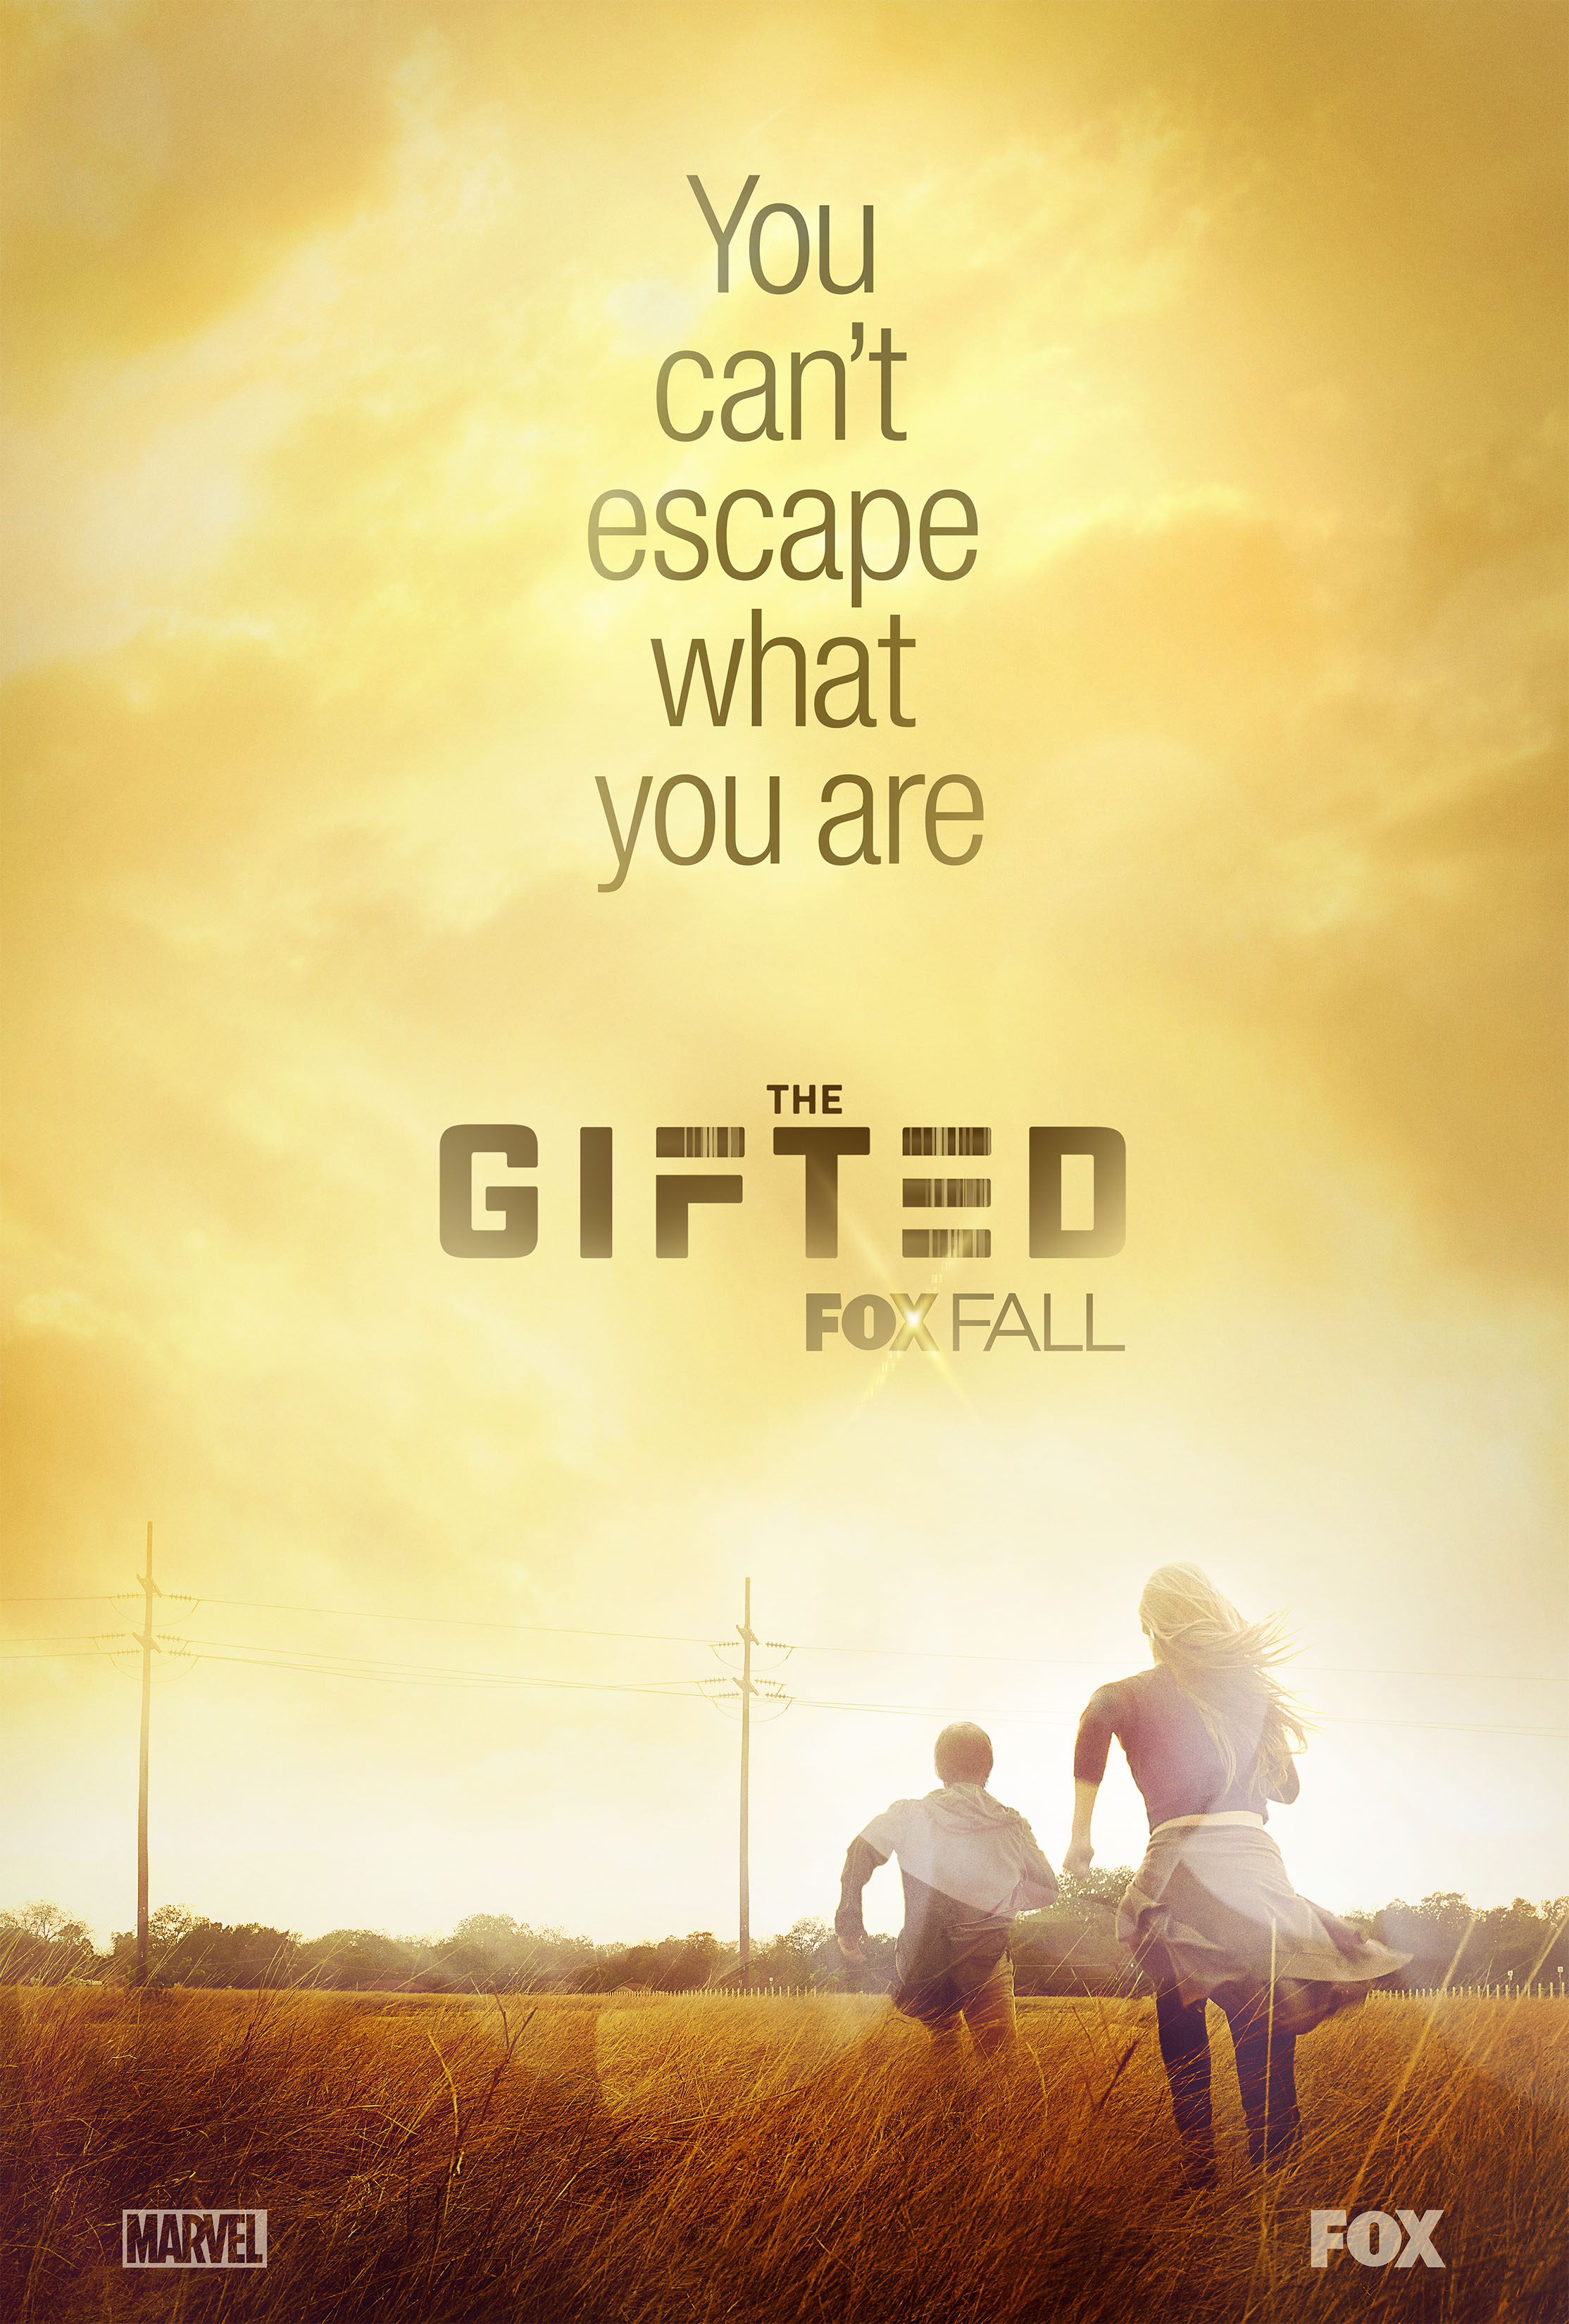 THE GIFTED teaser poster